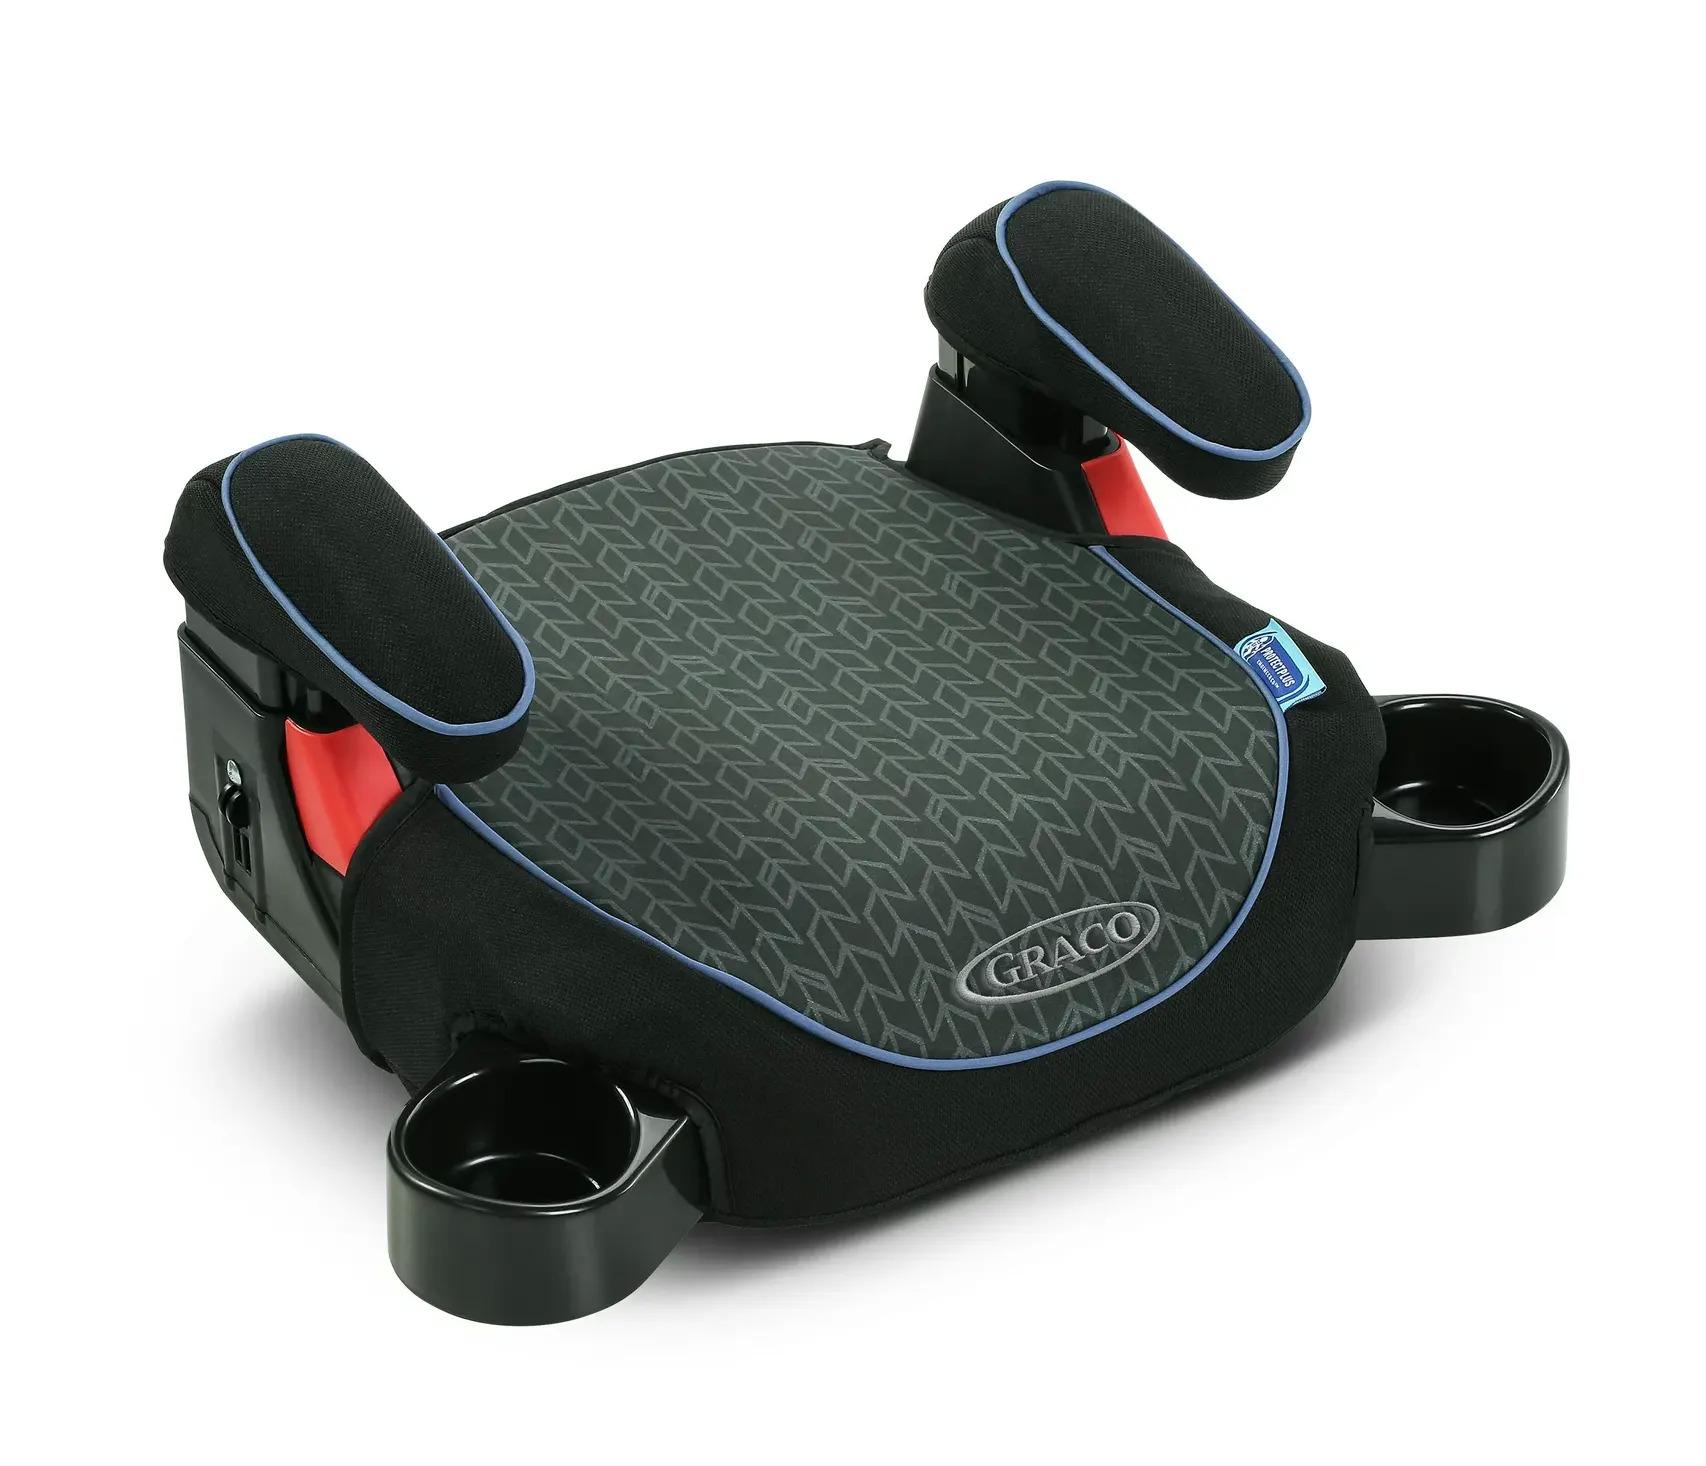 Graco TurboBooster Backless Booster Seat for $20.29